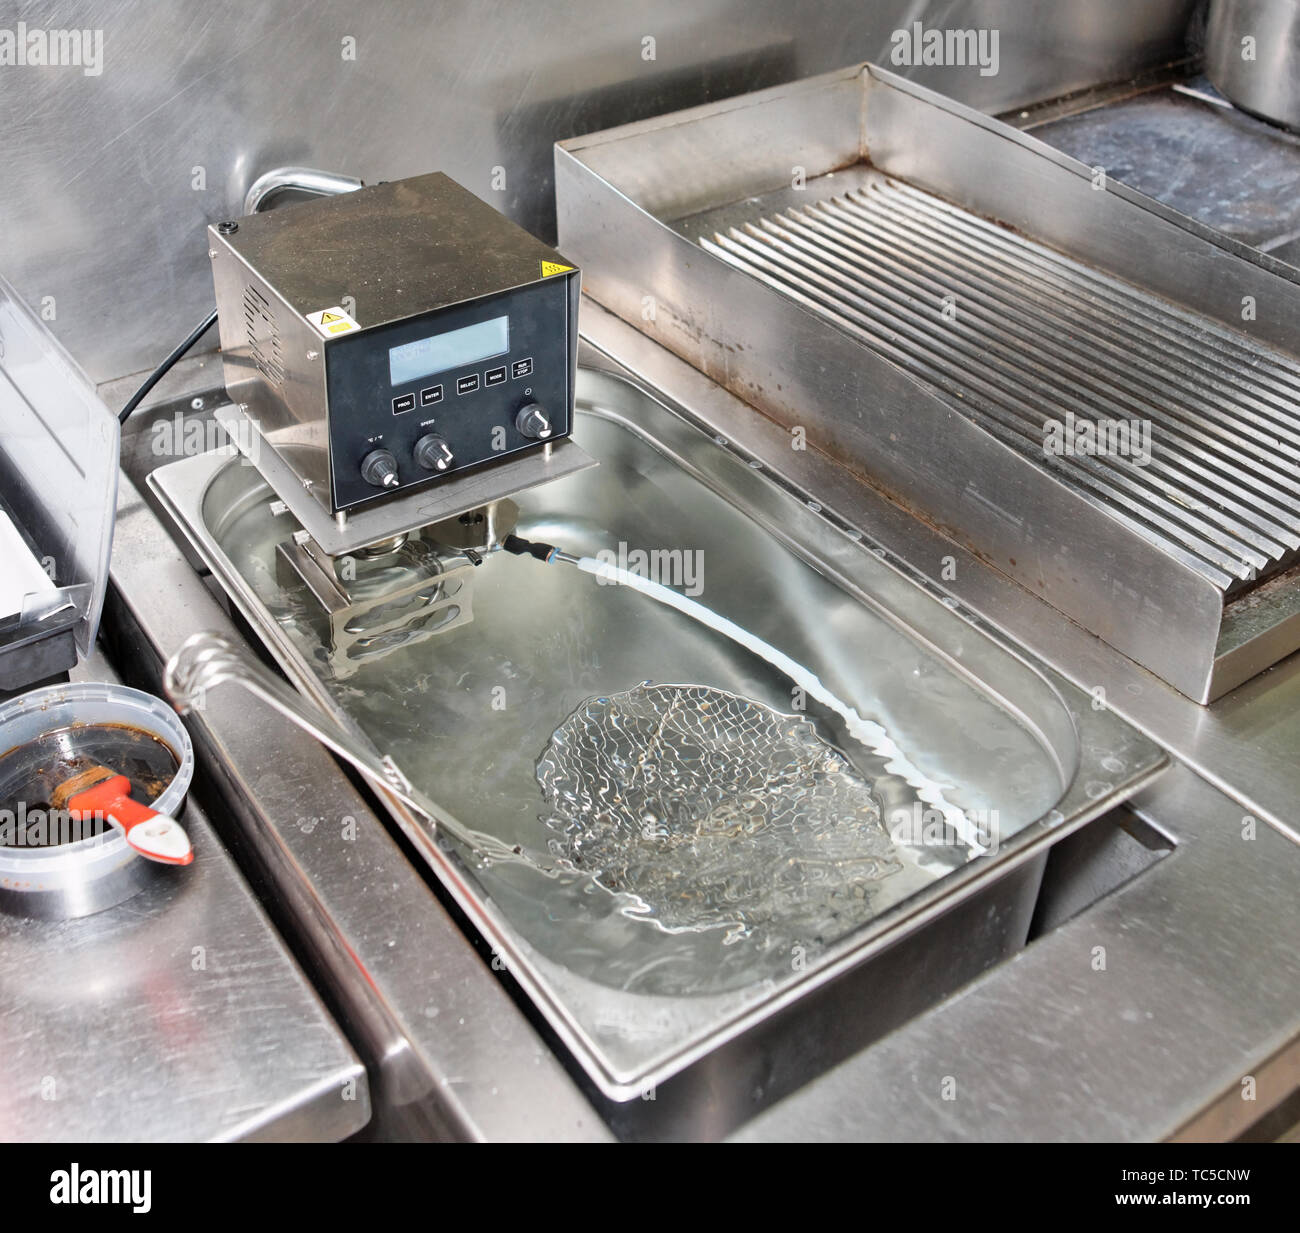 Low temperature boiling machine - new technology cuisine Stock Photo